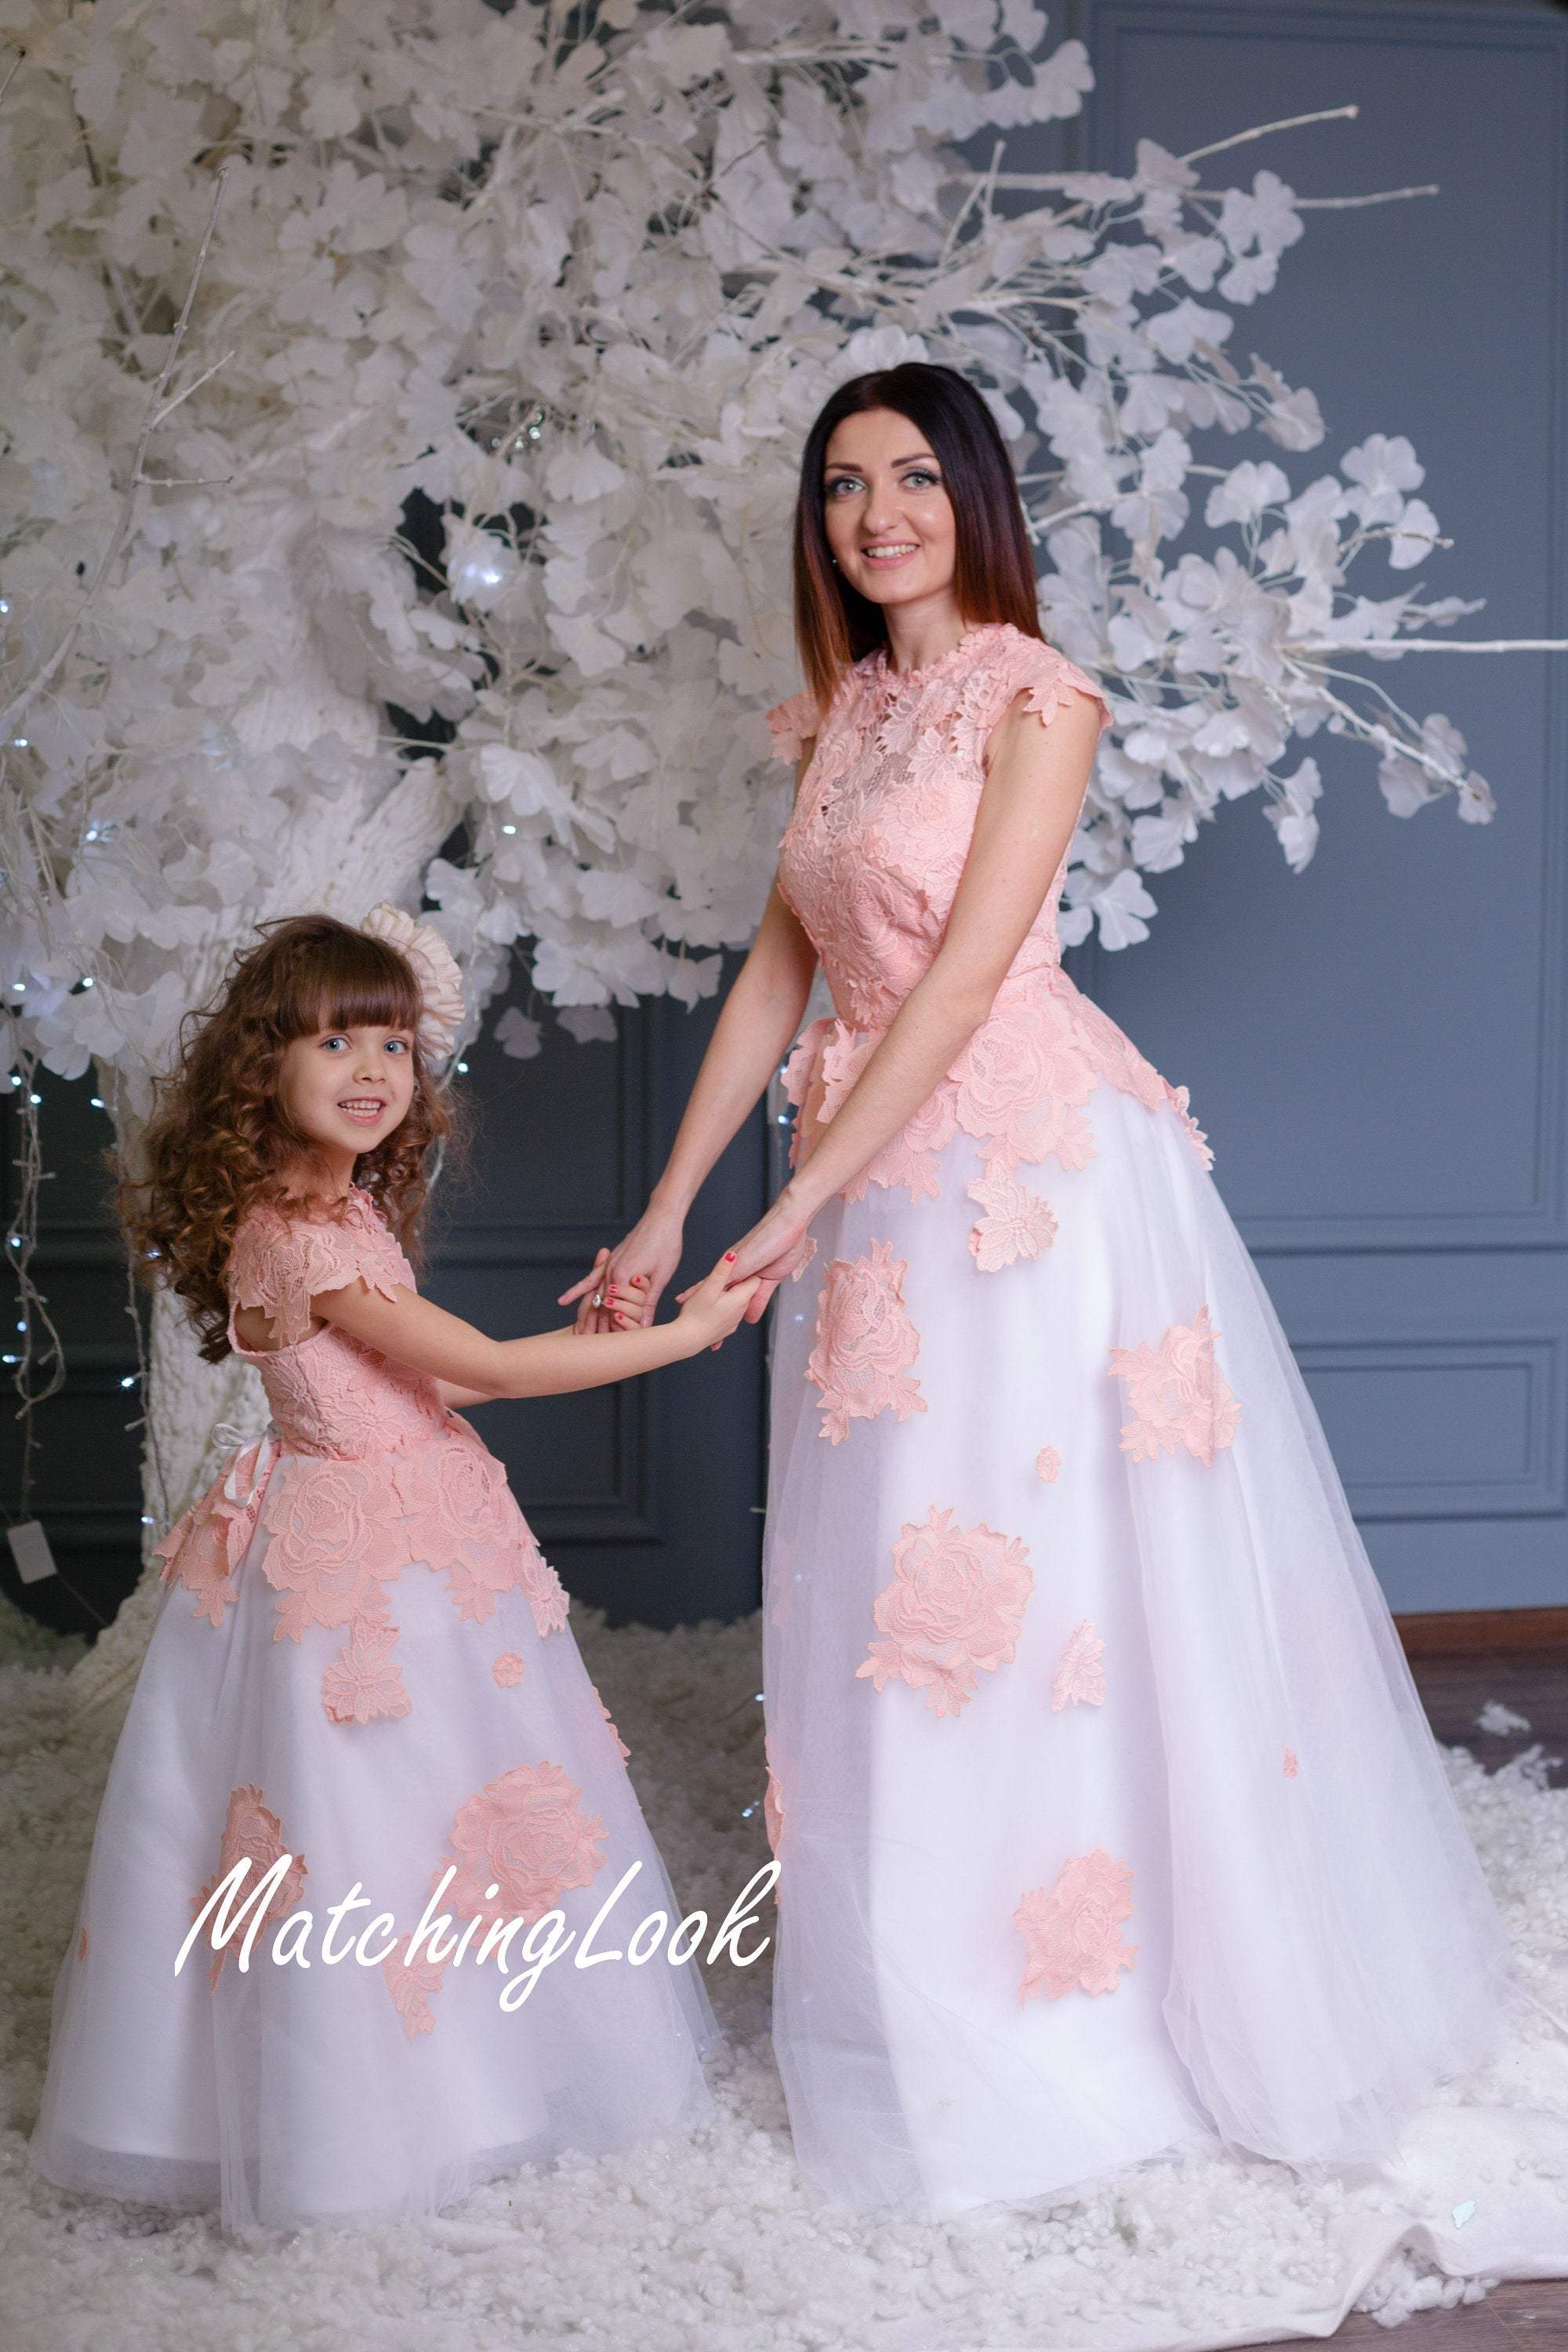 Custom made matching gown for mother and daughter in peplum style | Mother  daughter outfits, Mom daughter outfits, Mommy daughter dresses